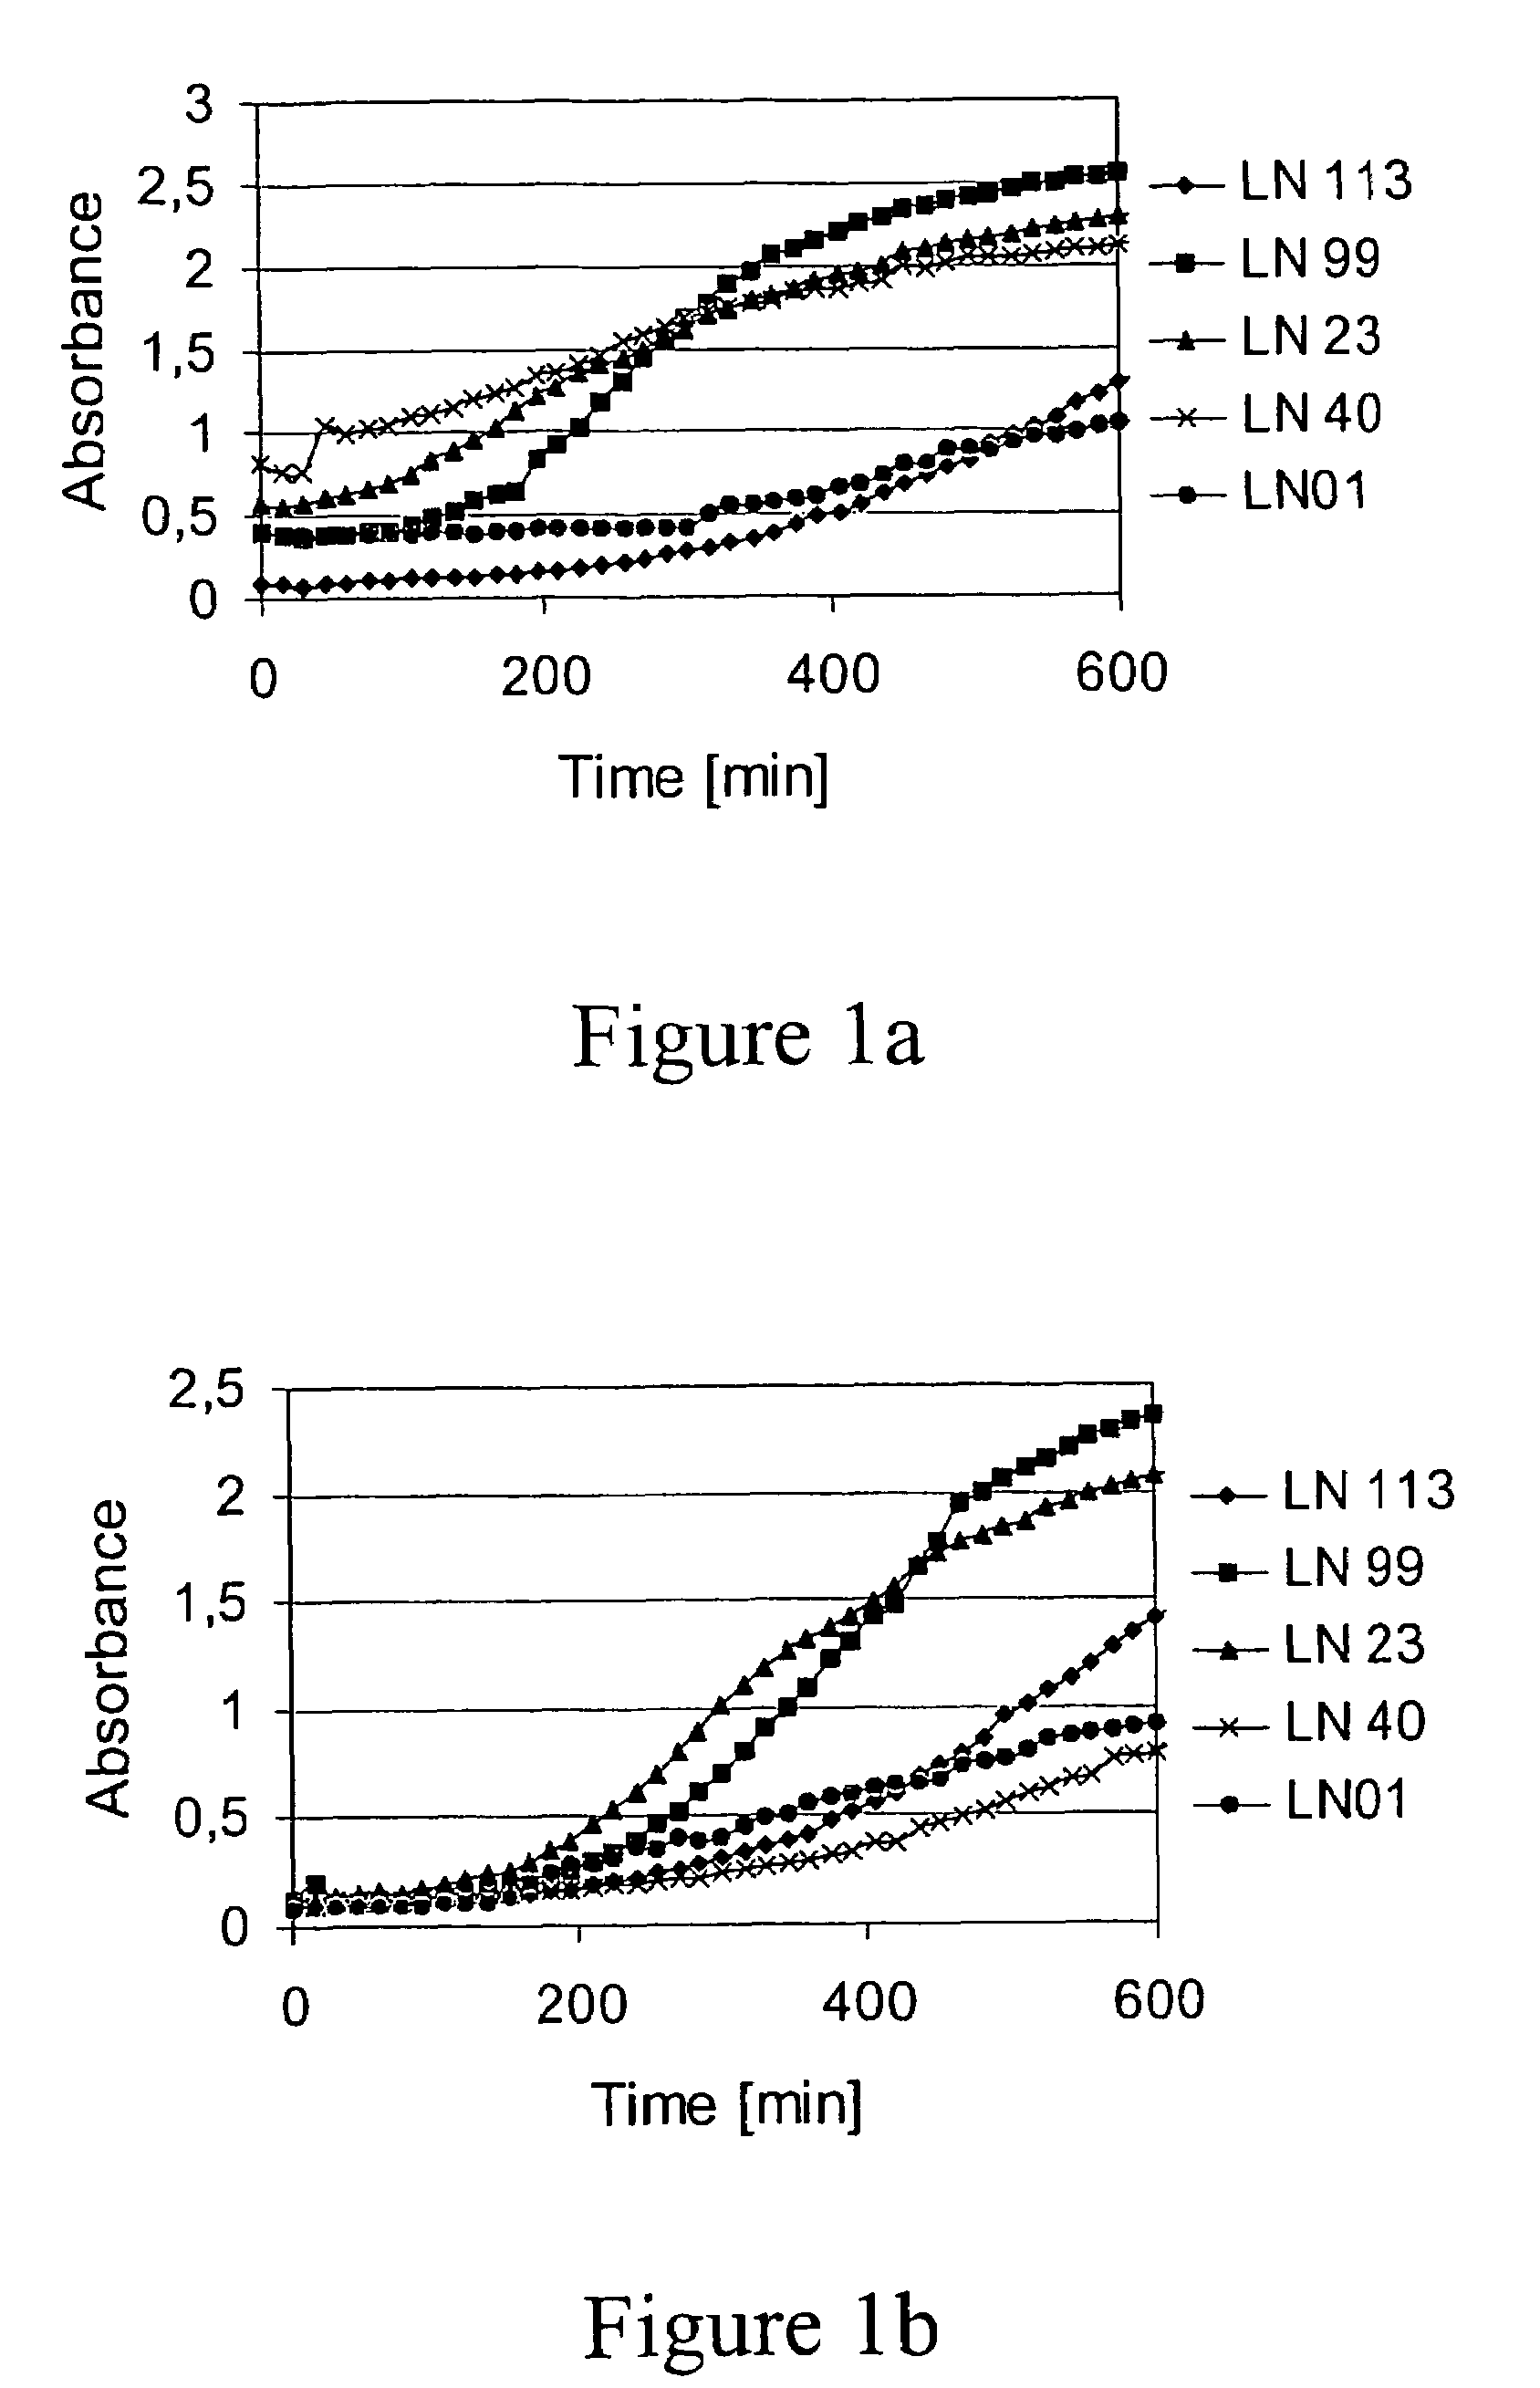 Lactic acid producing bacteria for use as probiotic organisms in the human vagina